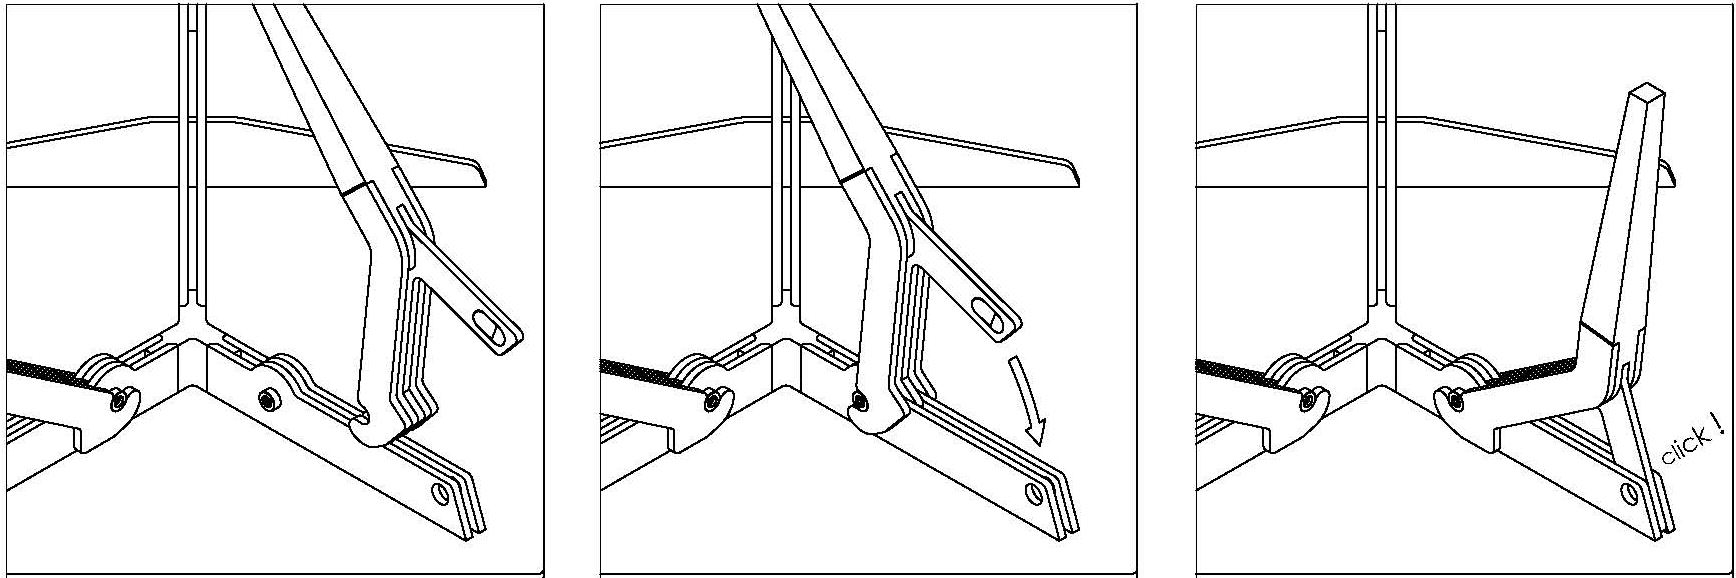 attachment of table legs